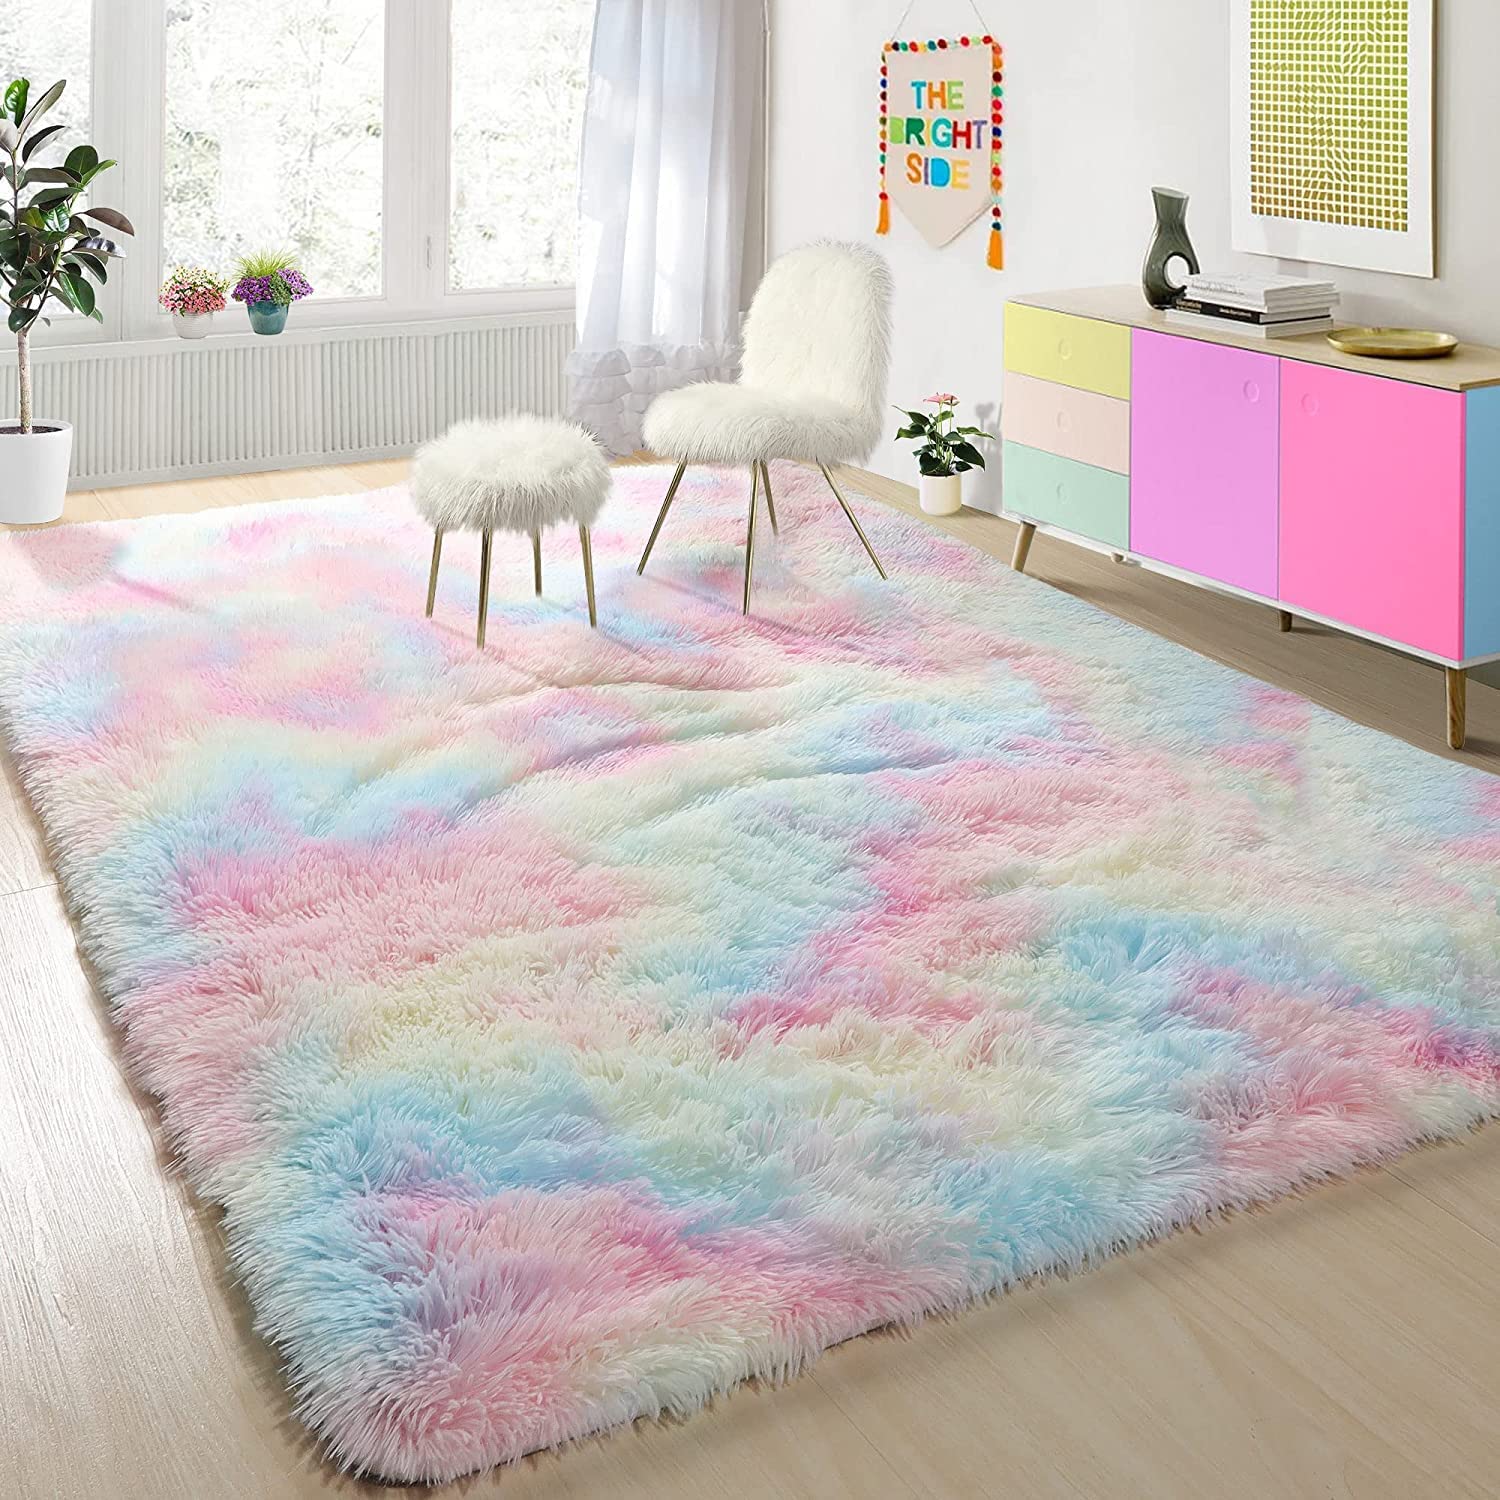 Junovo Soft Rainbow Area Rugs for Girls Room, Fluffy Colorful Rugs Cute Floor Carpets Shaggy Playing Mat for Kids Baby Girls Bedroom Nursery Room, 4'x6',Rainbow - image 1 of 8